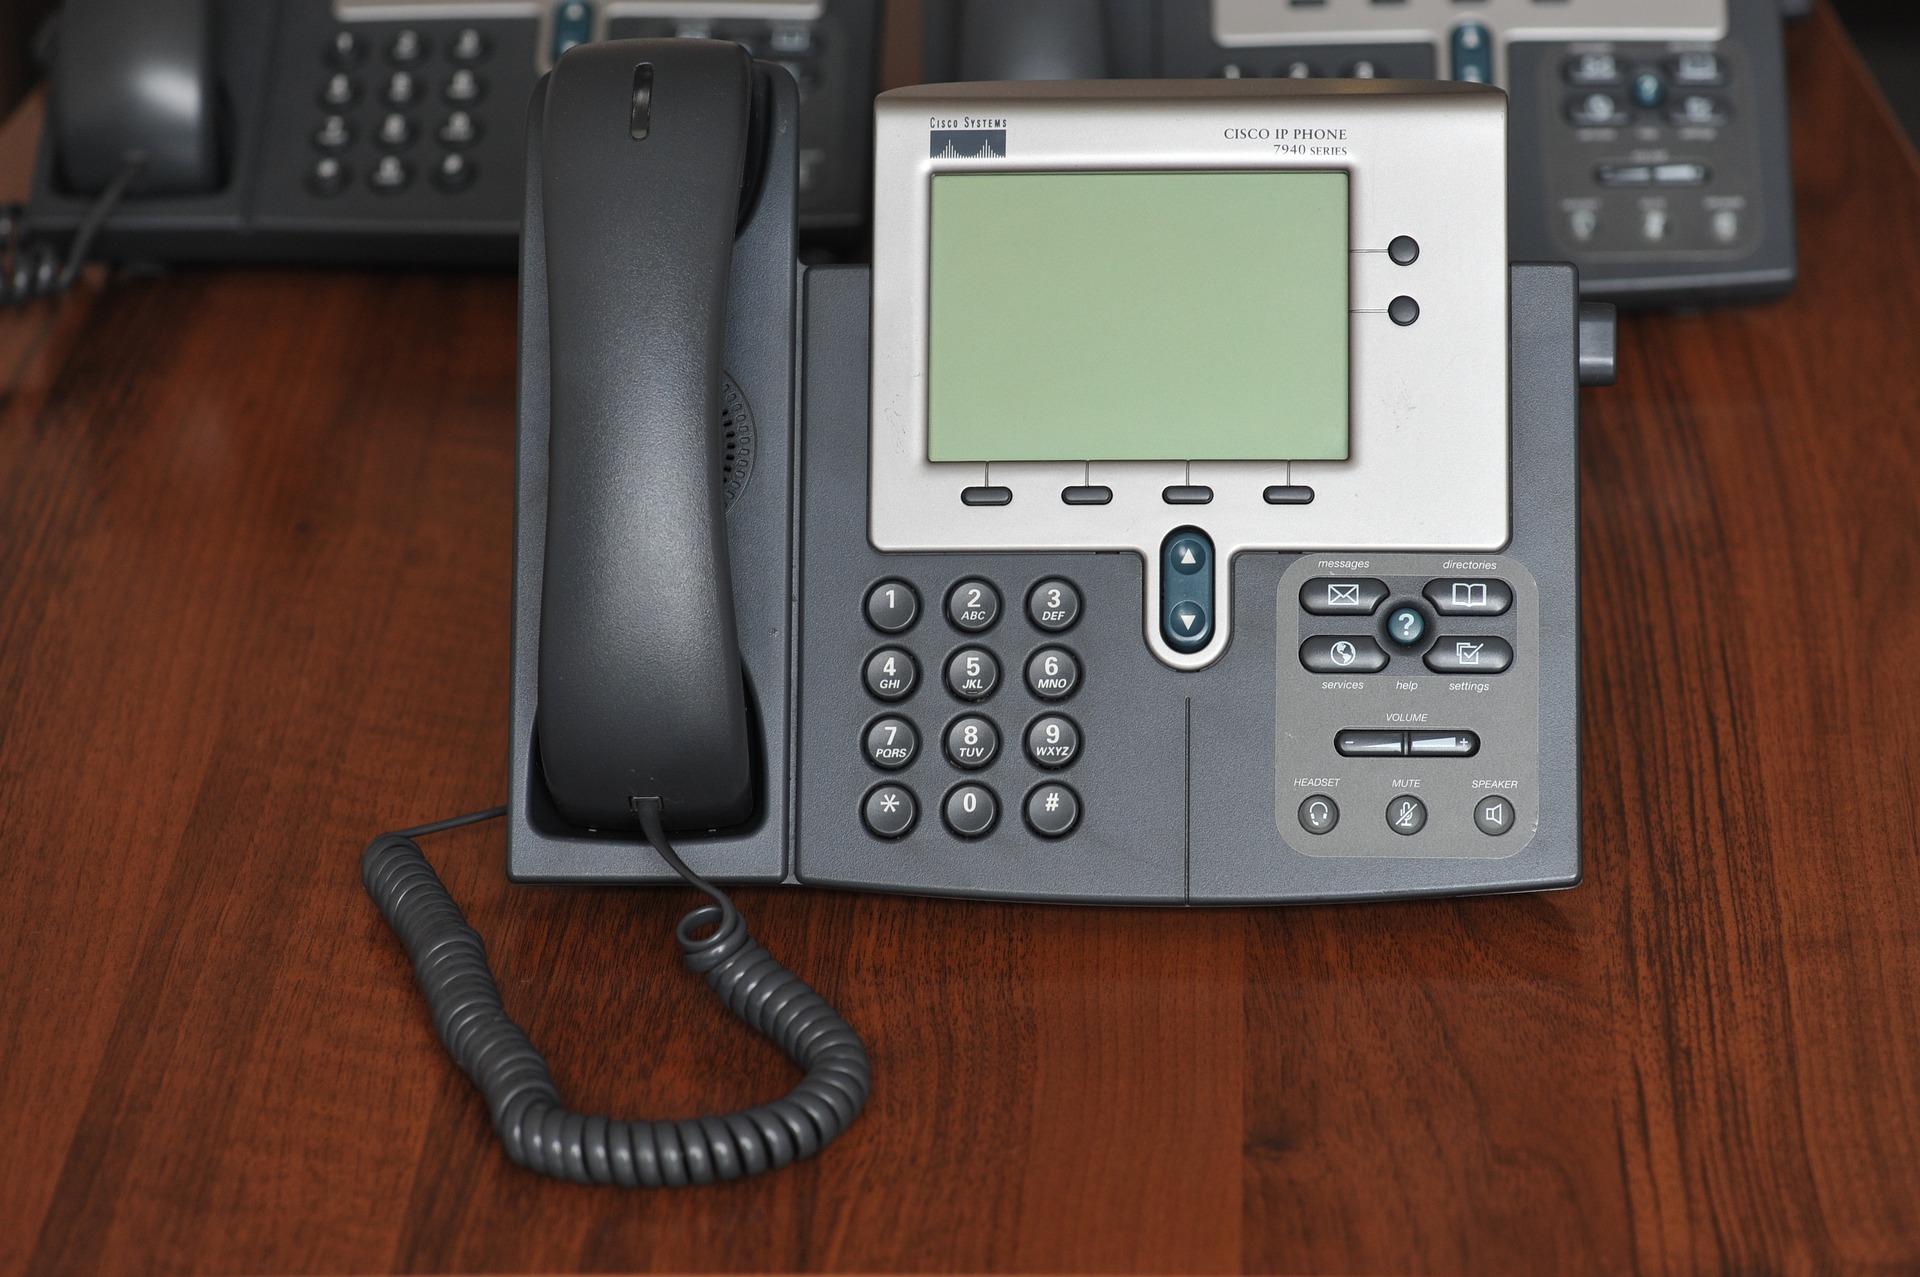 close up of telephony system to illustrate VOiP phone